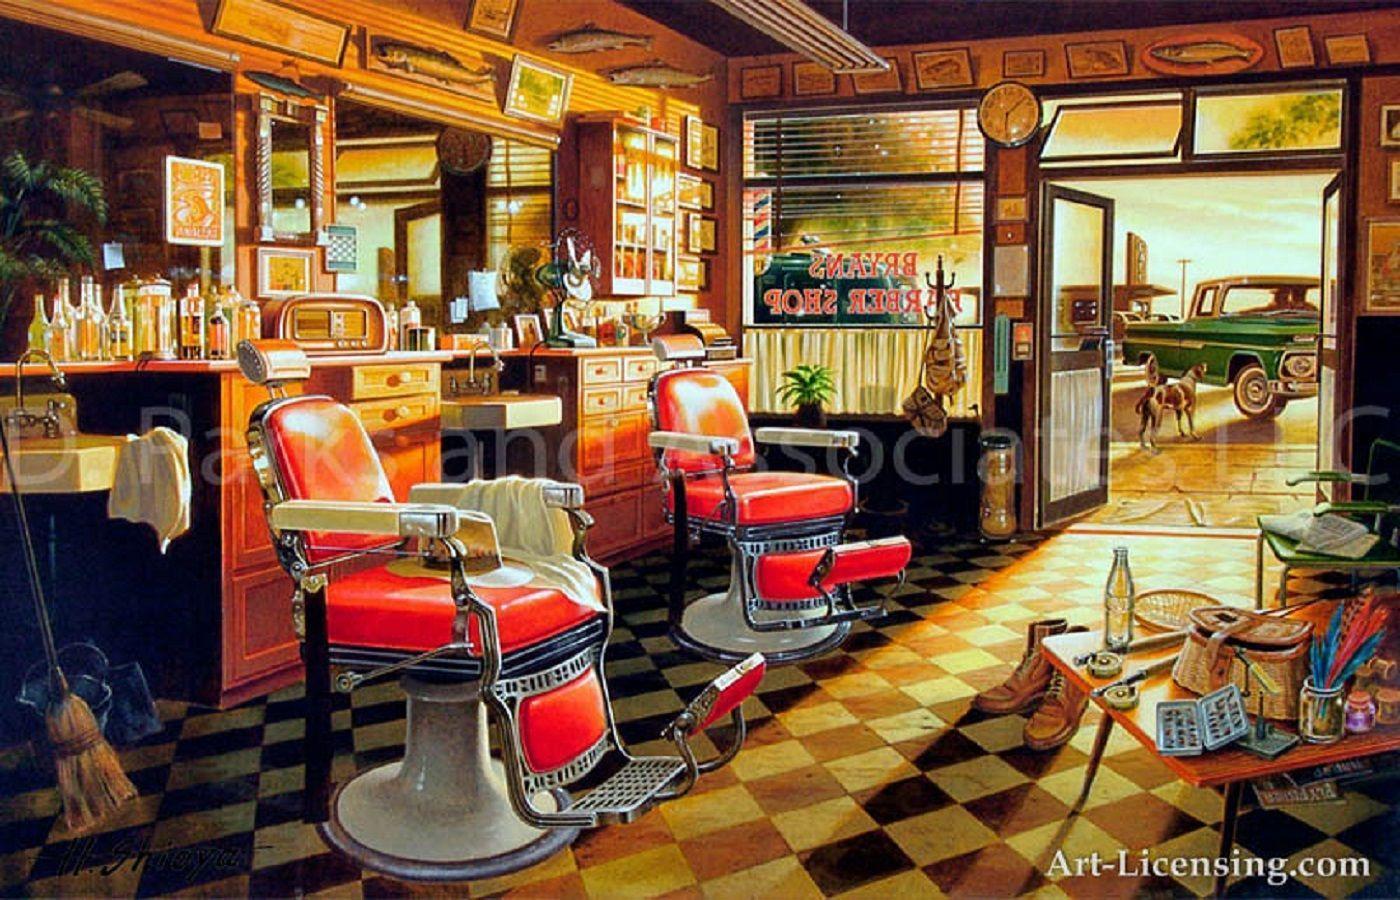 Barber shop Download HD Wallpaper and Free Image